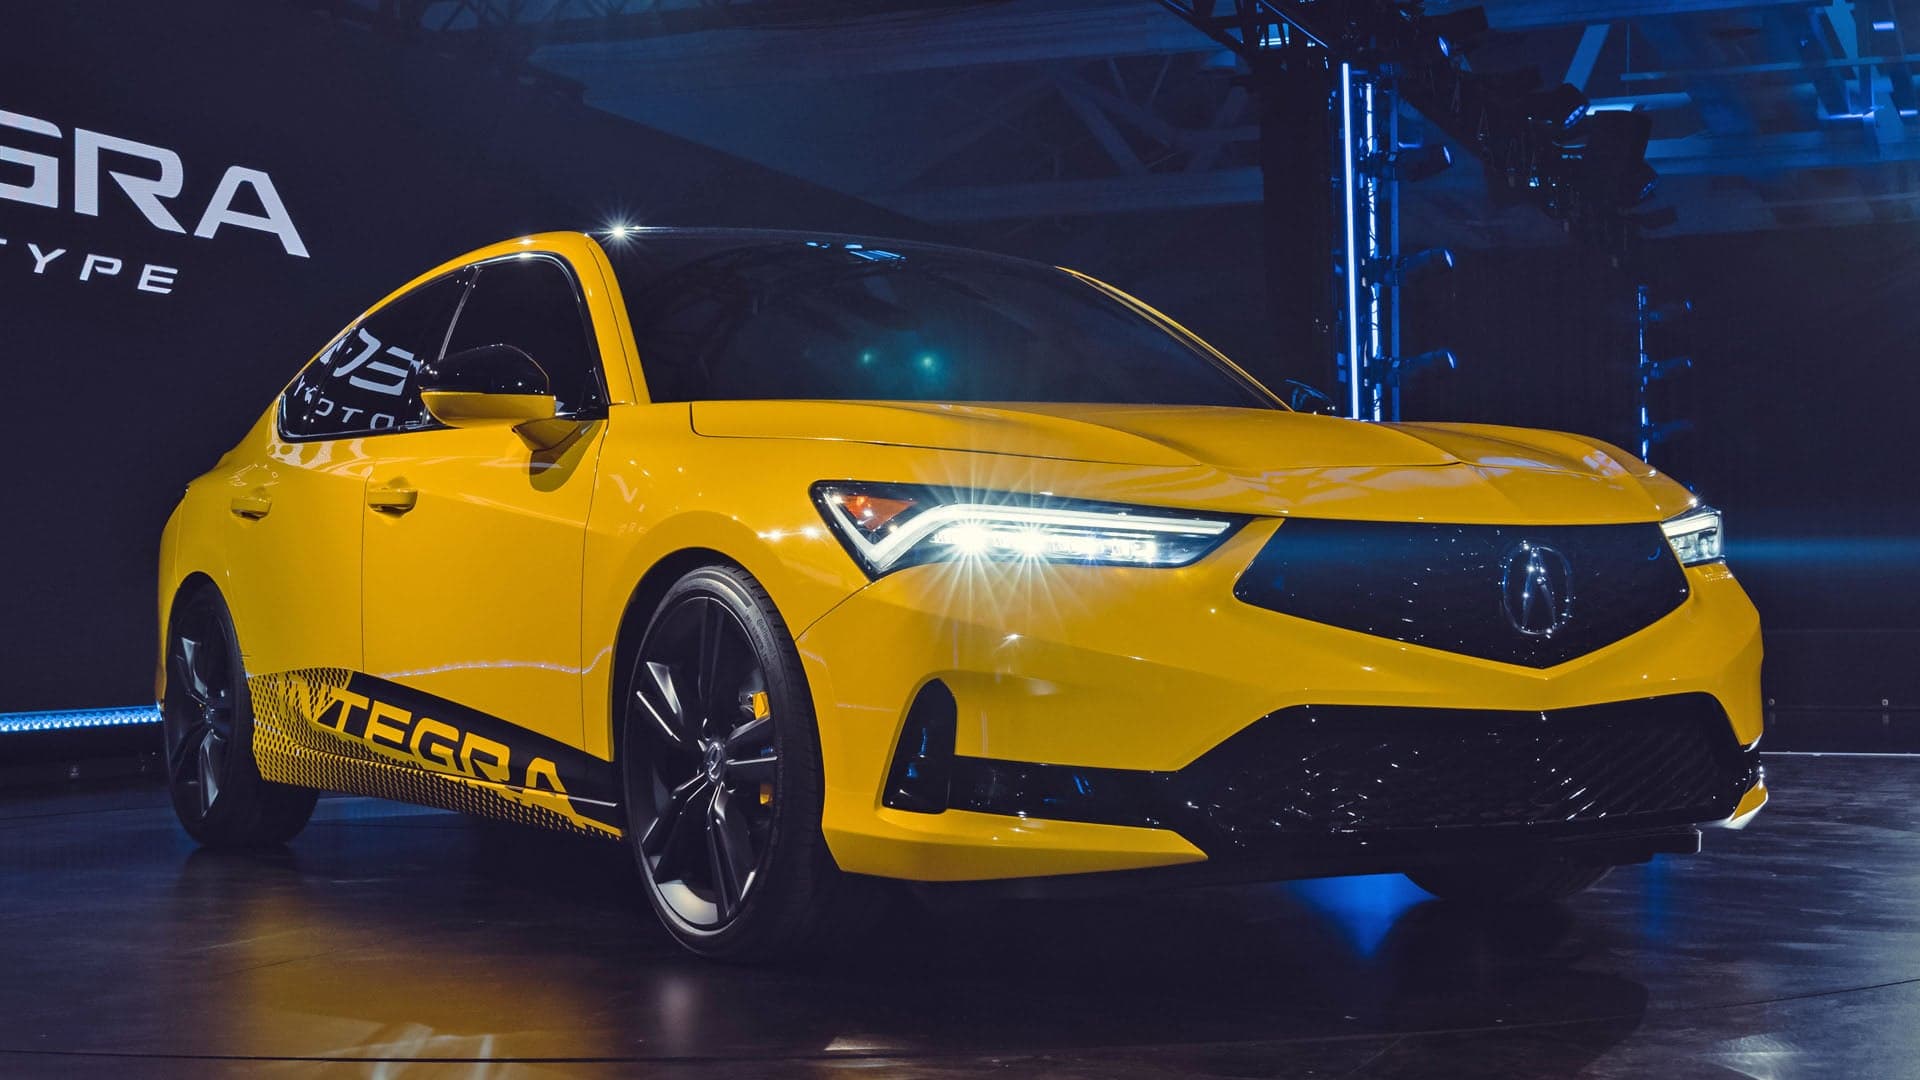 You Can Reserve a 2023 Acura Integra Starting March 10